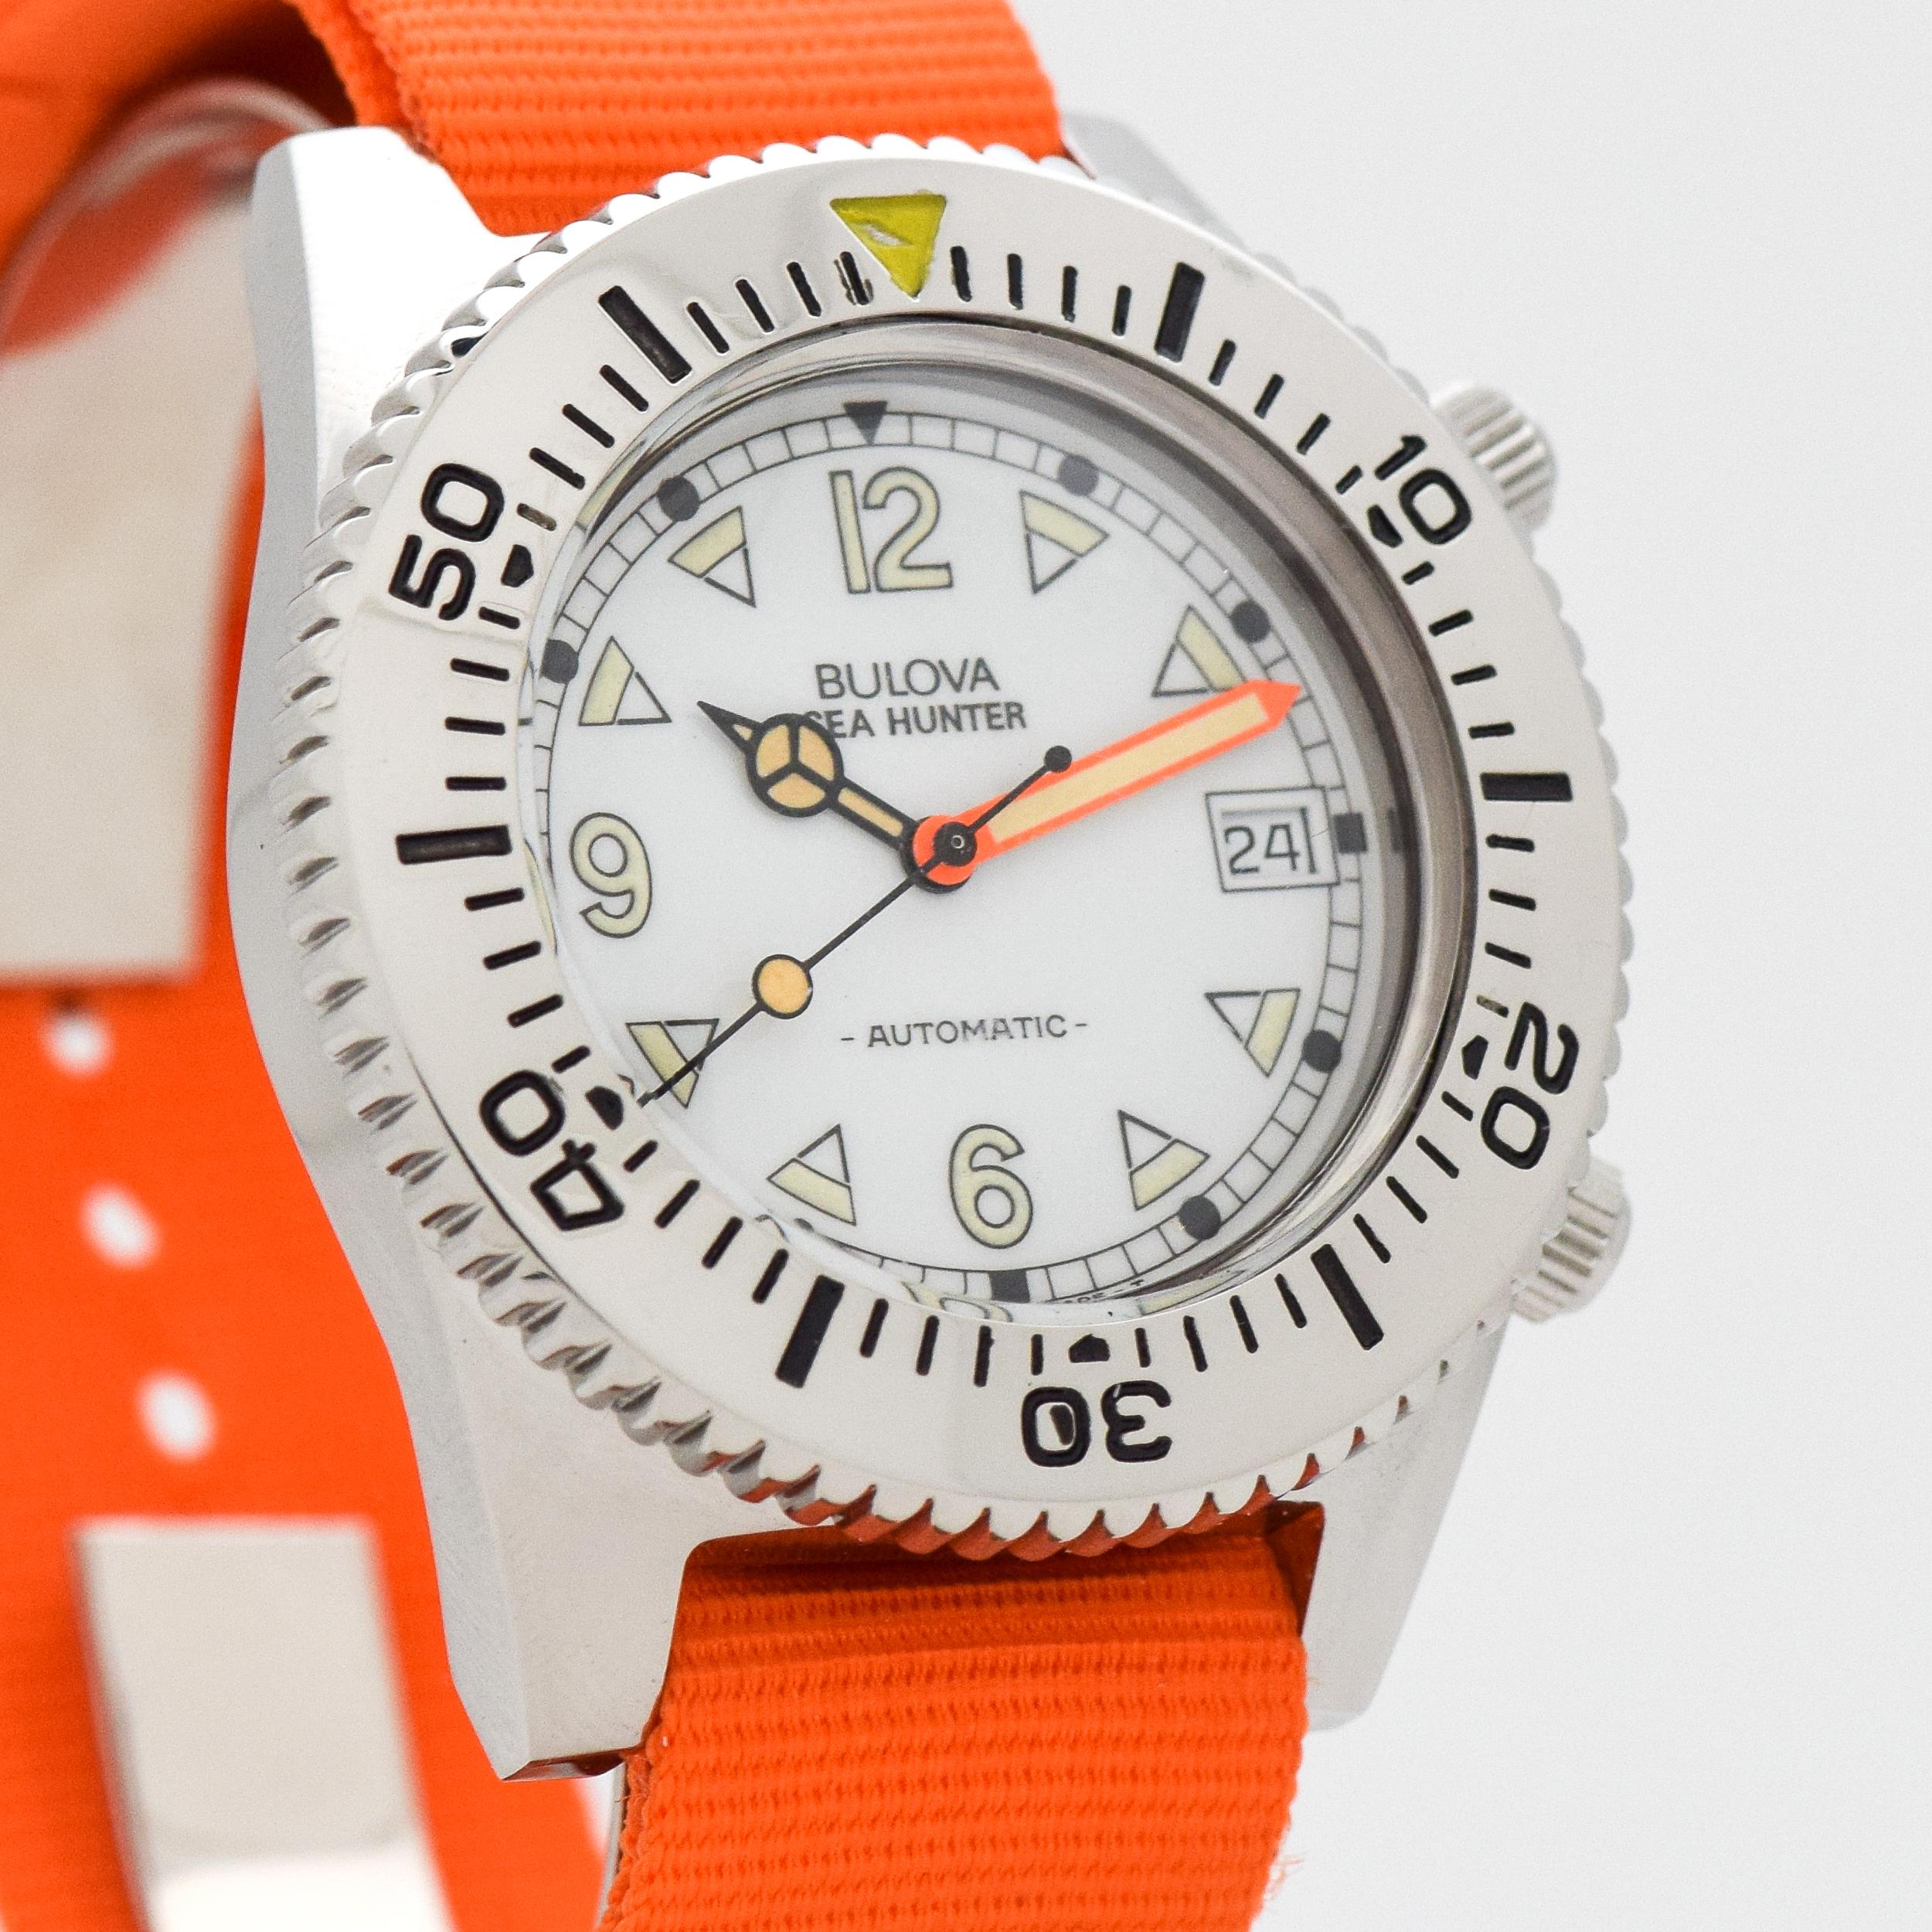 1970's Vintage Bulova Sea Hunter Ref. 11933 Diver's Stainless Steel watch with Locking Rotating Diver's Bezel with Original White Dial with Luminous Arabic 6, 9, and 12 and Triangle Painted Markers. 42mm x 47mm lug to lug (1.65 in. x 1.85 in.) - 25